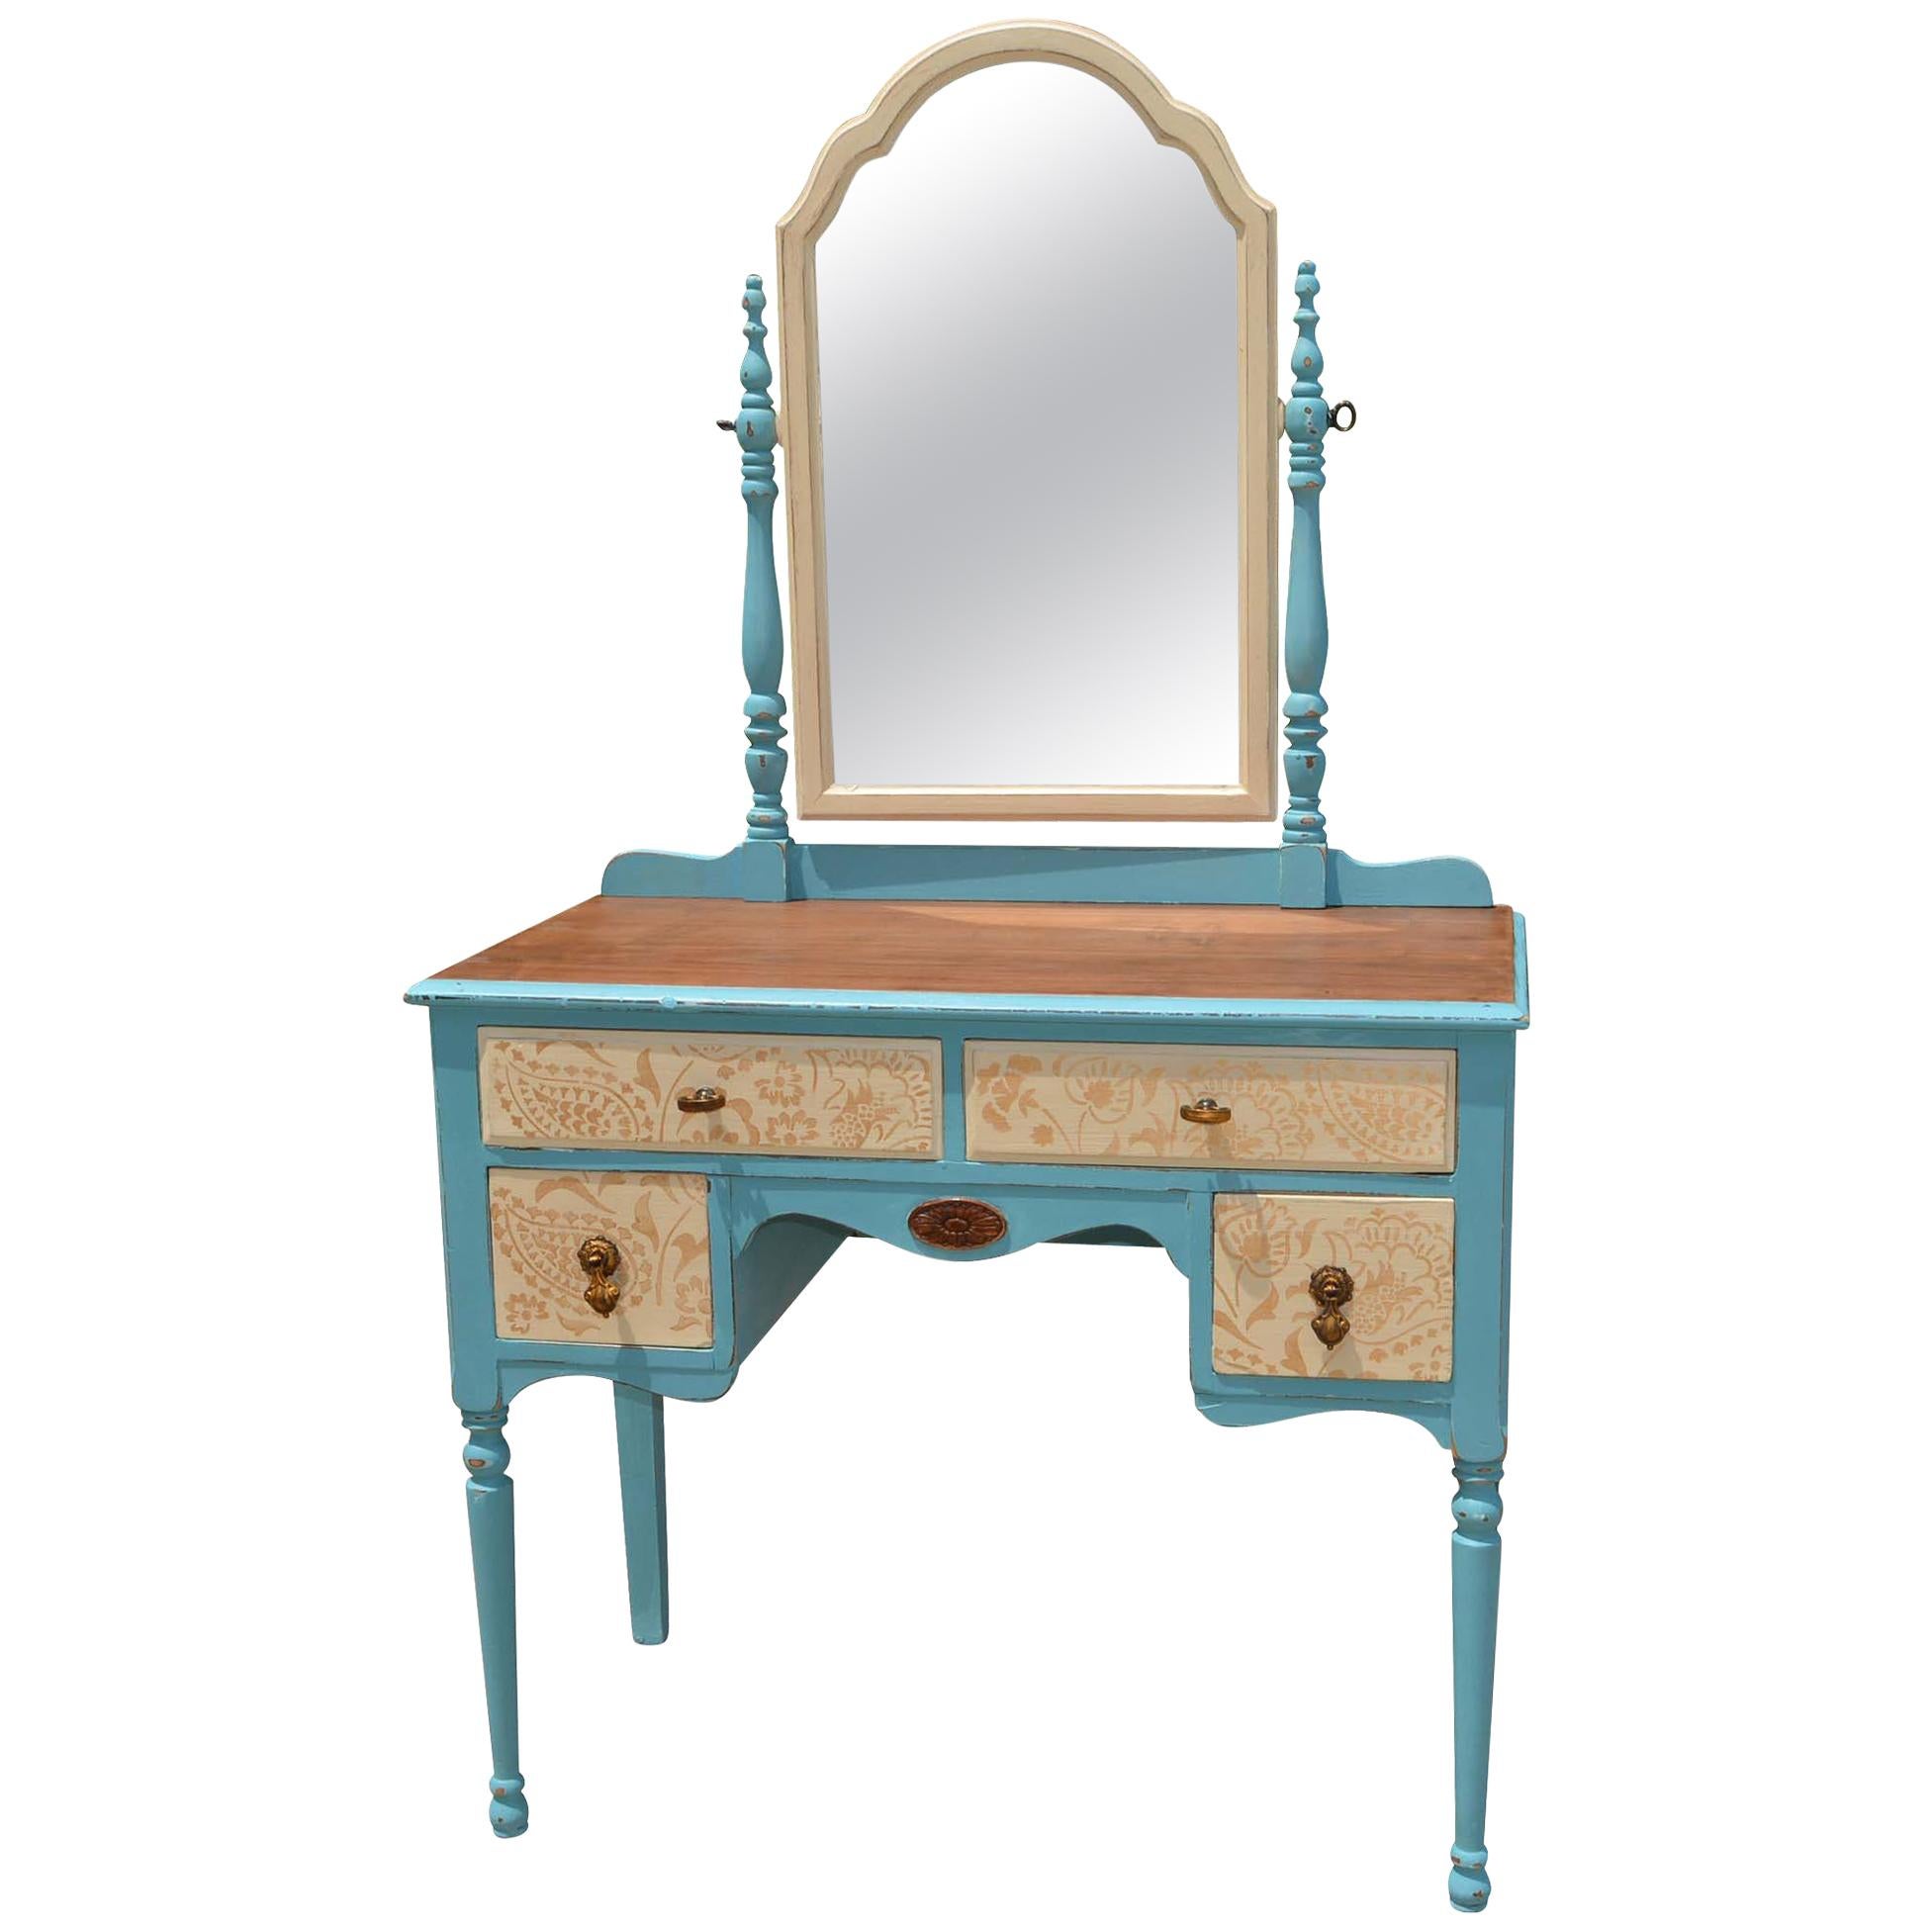 Painted Wood Makeup Vanity Desk with Mirror and Upholstered Chair